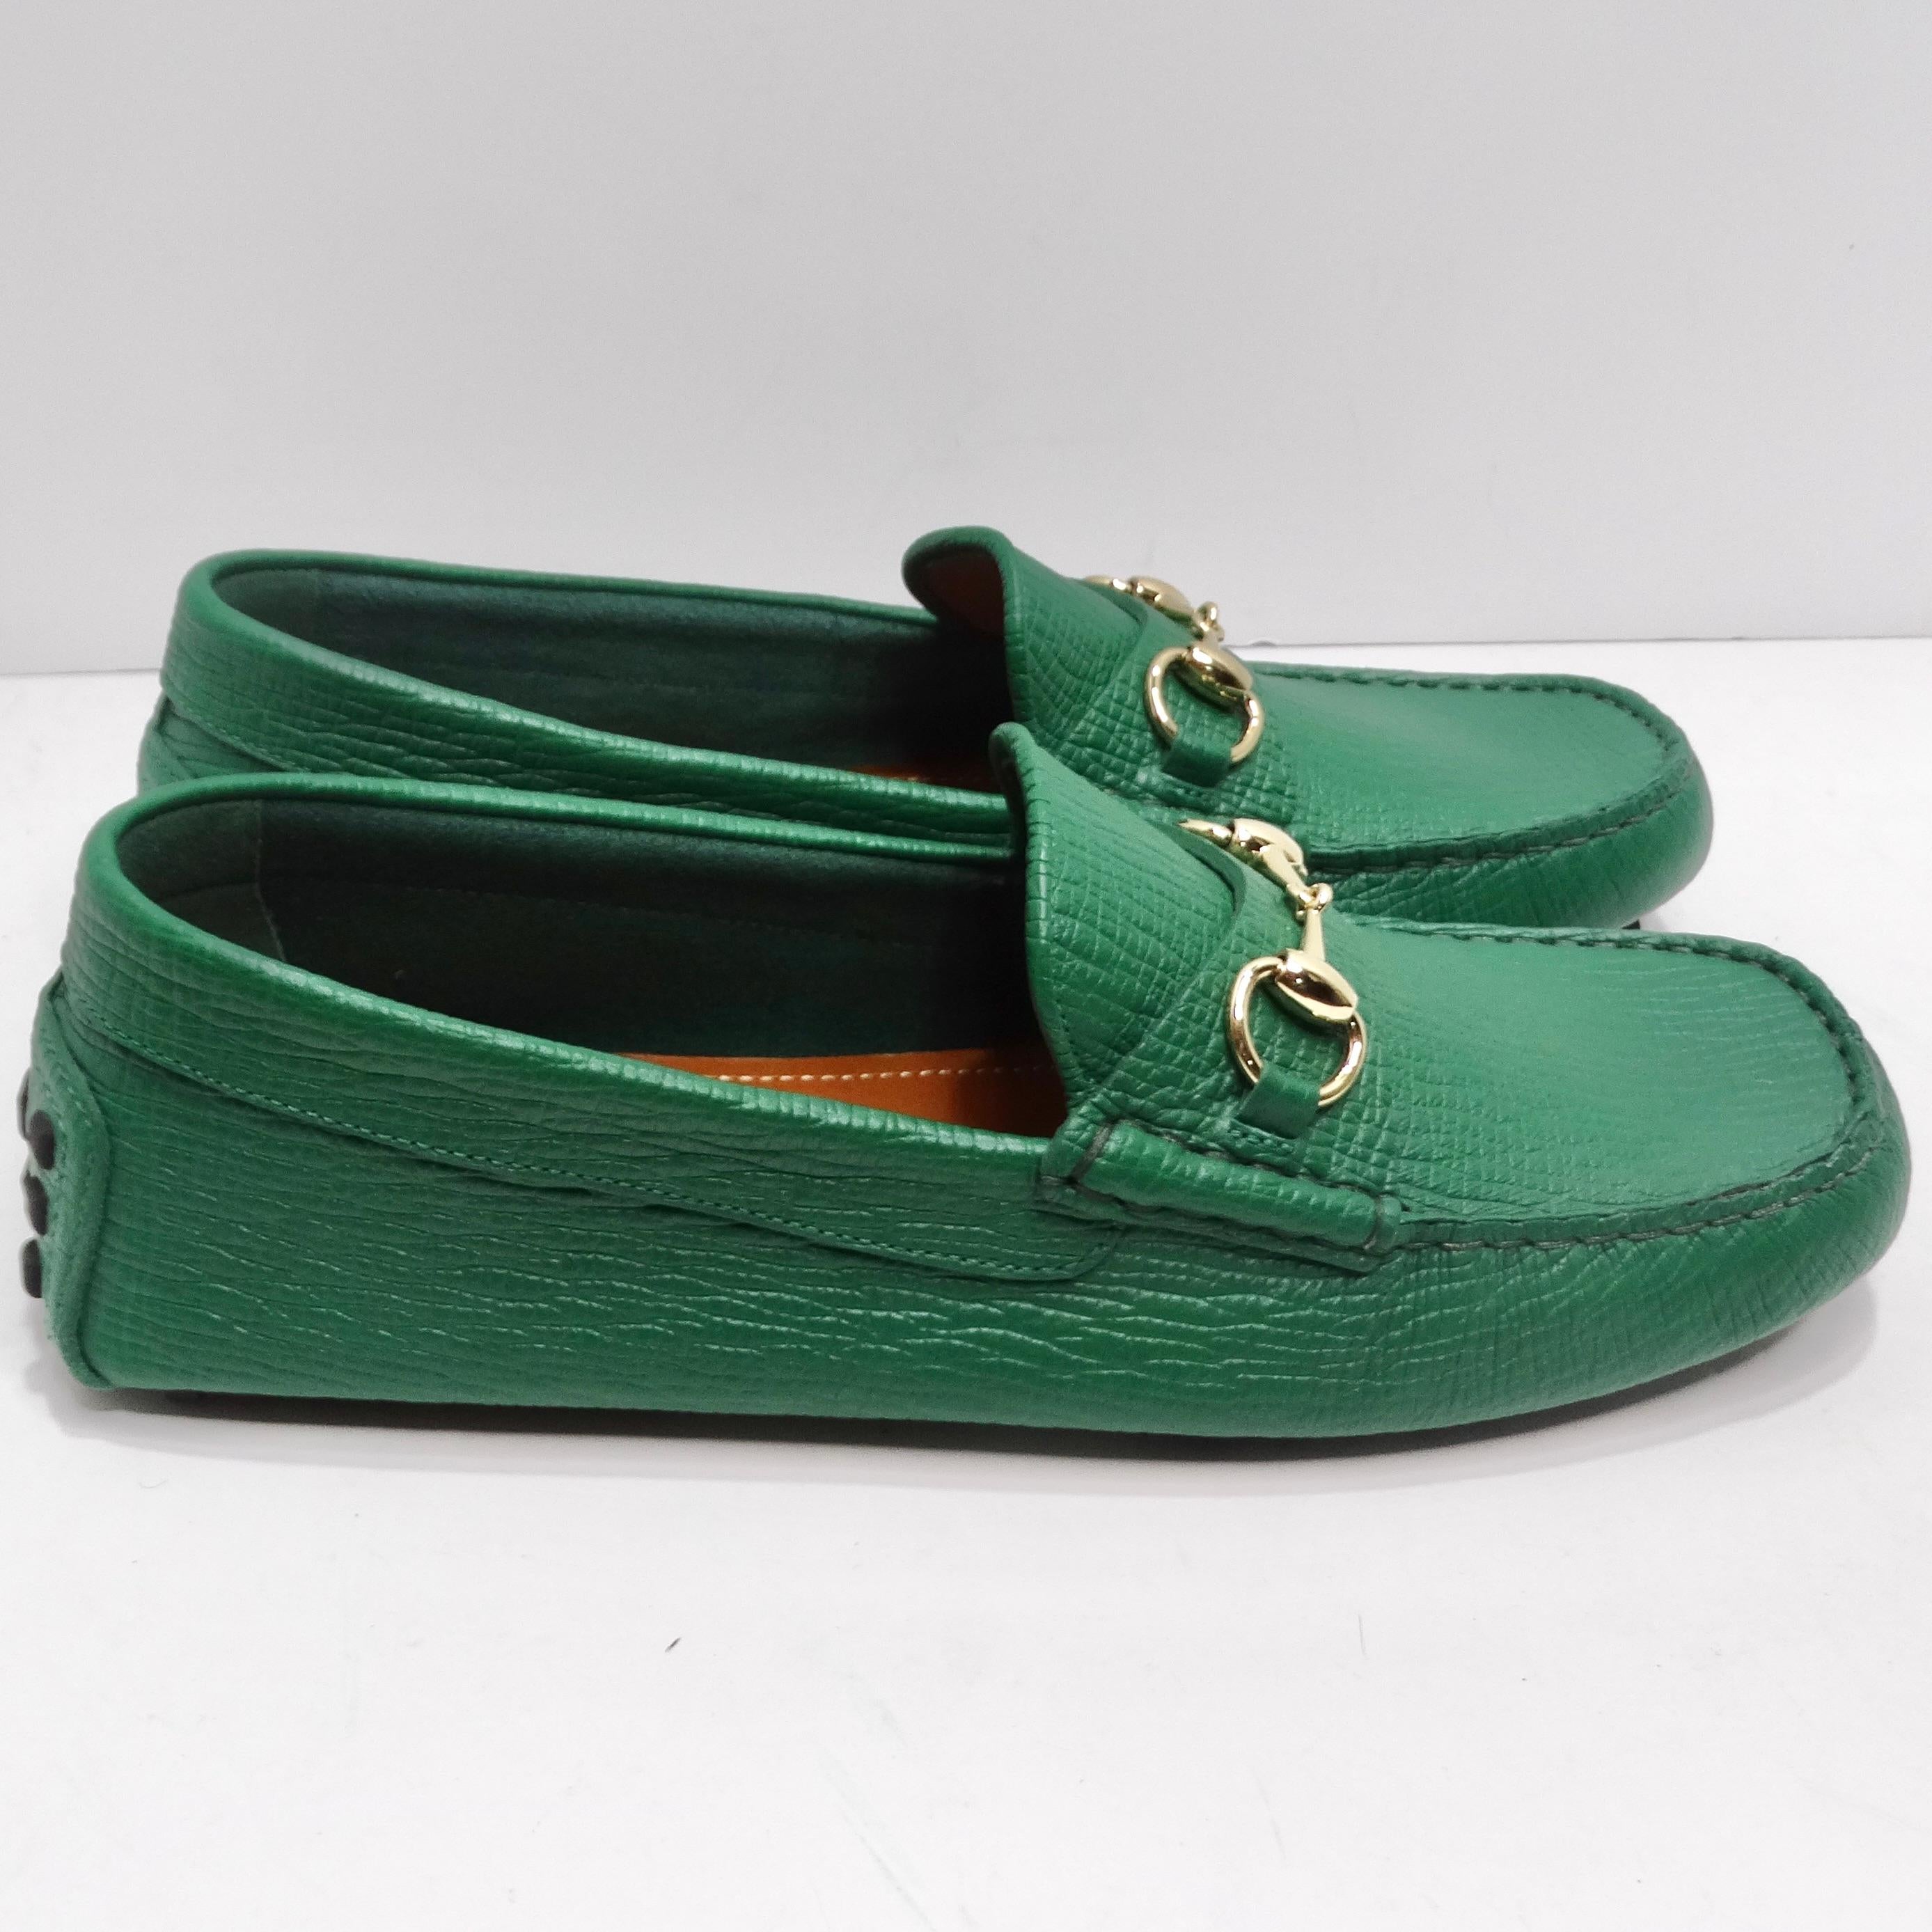 Gucci Horsebit Driver Loafers In Green In New Condition For Sale In Scottsdale, AZ